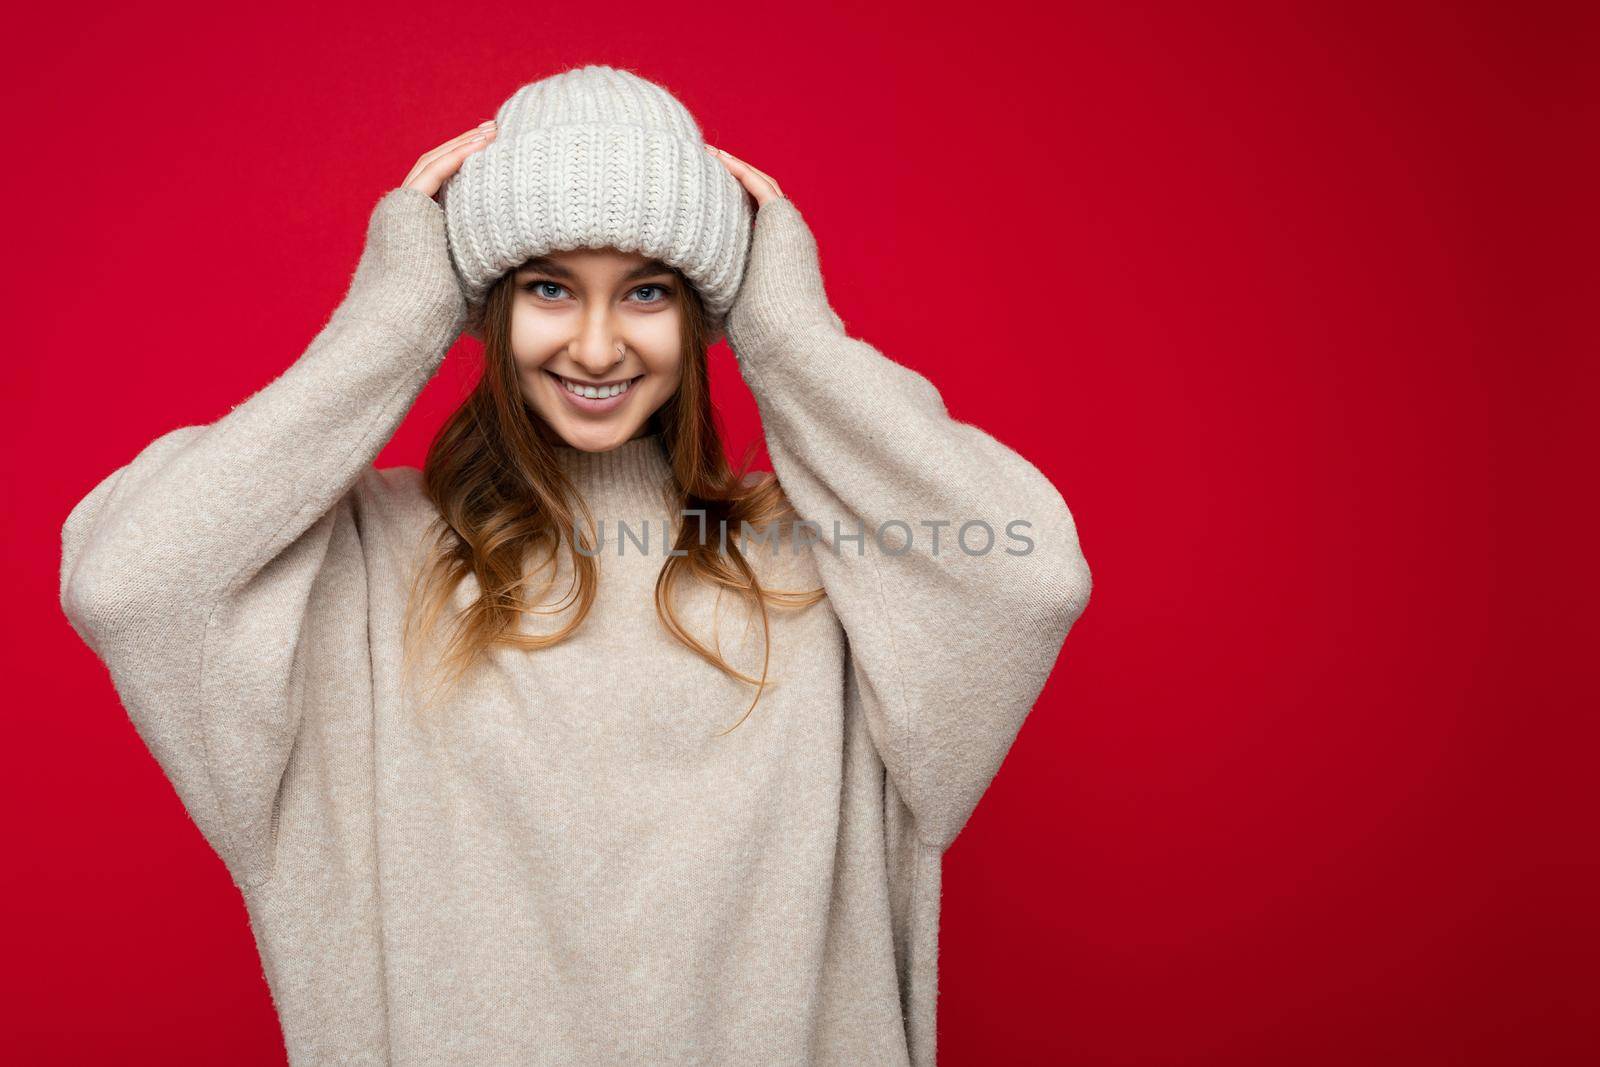 Attractive smiling happy young dark blond woman standing isolated over colorful background wall wearing everyday stylish outfit showing facial emotions looking at camera. Empty space